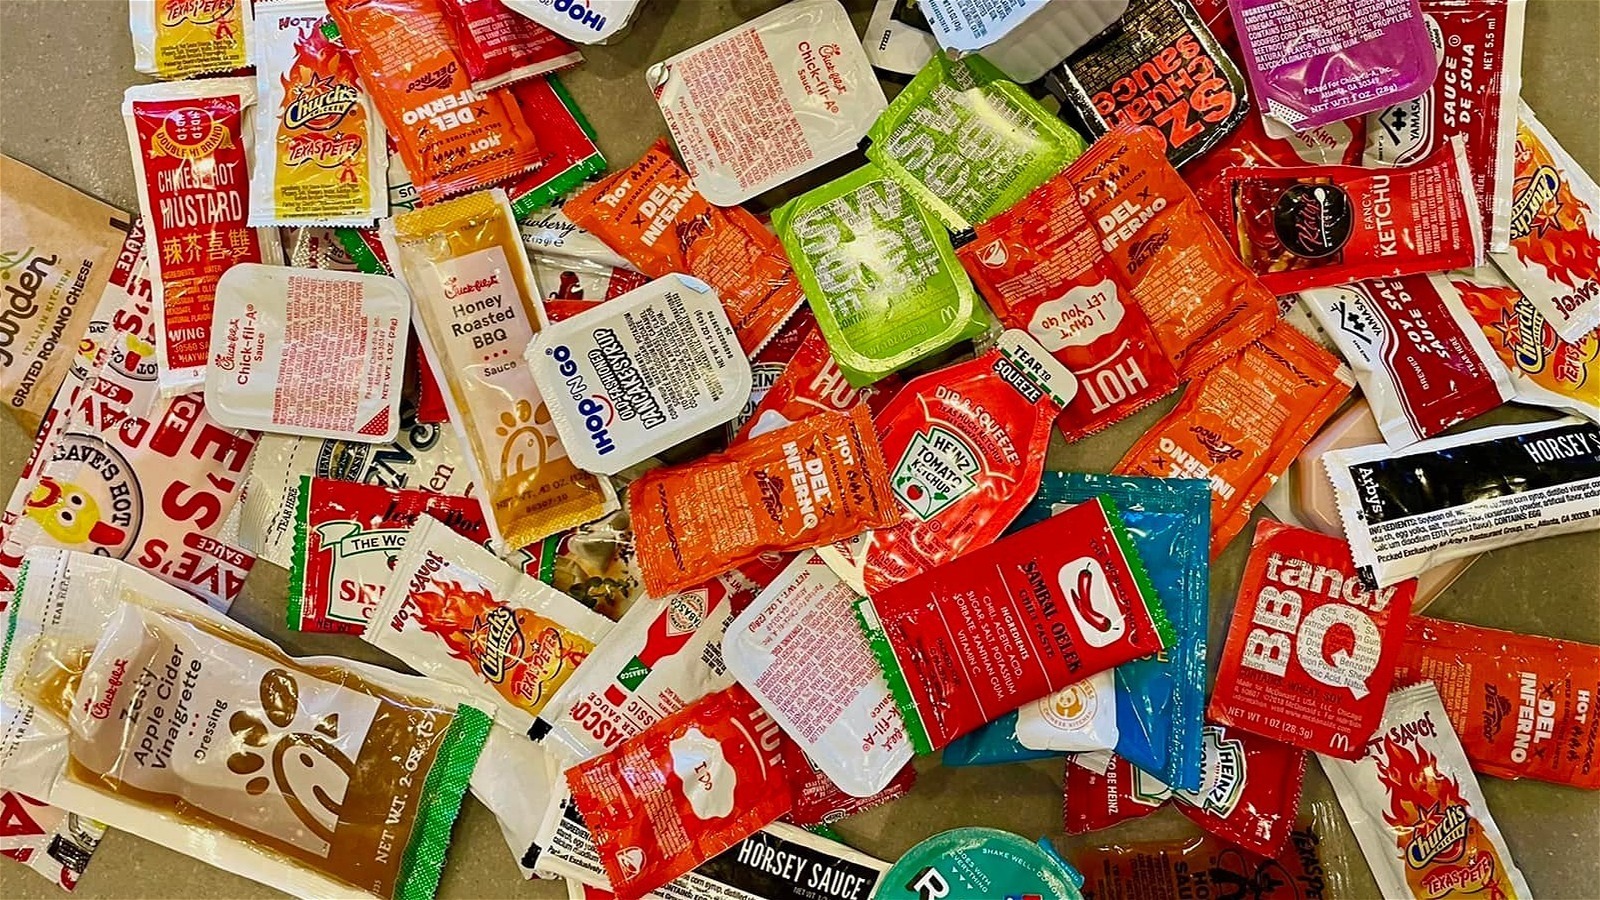 Why Some Fast Food Restaurants Charge For Extra Sauce Packets